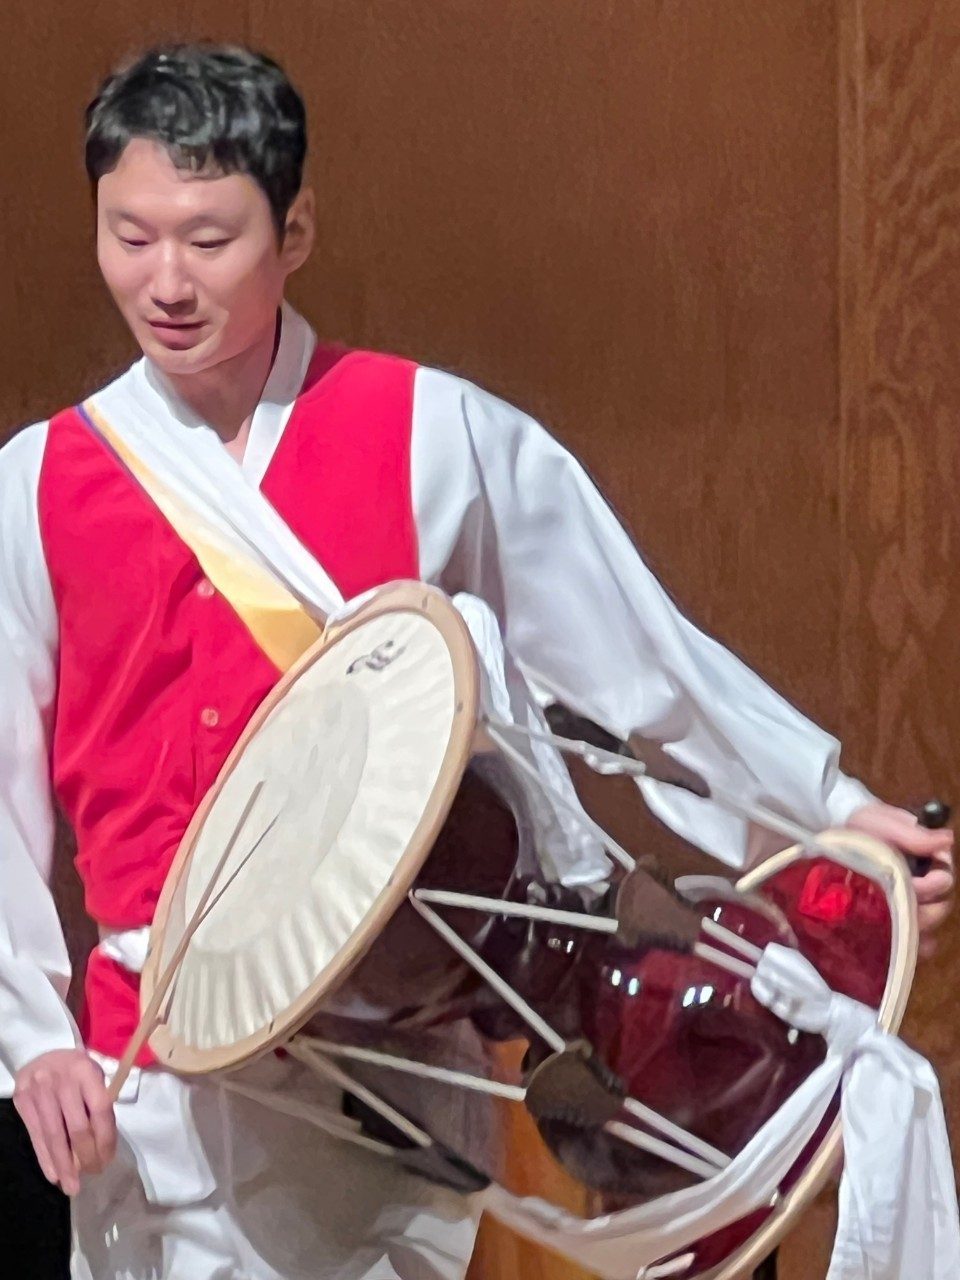 Suwan Choi performs standing, playing a drum strapped around the shoulder